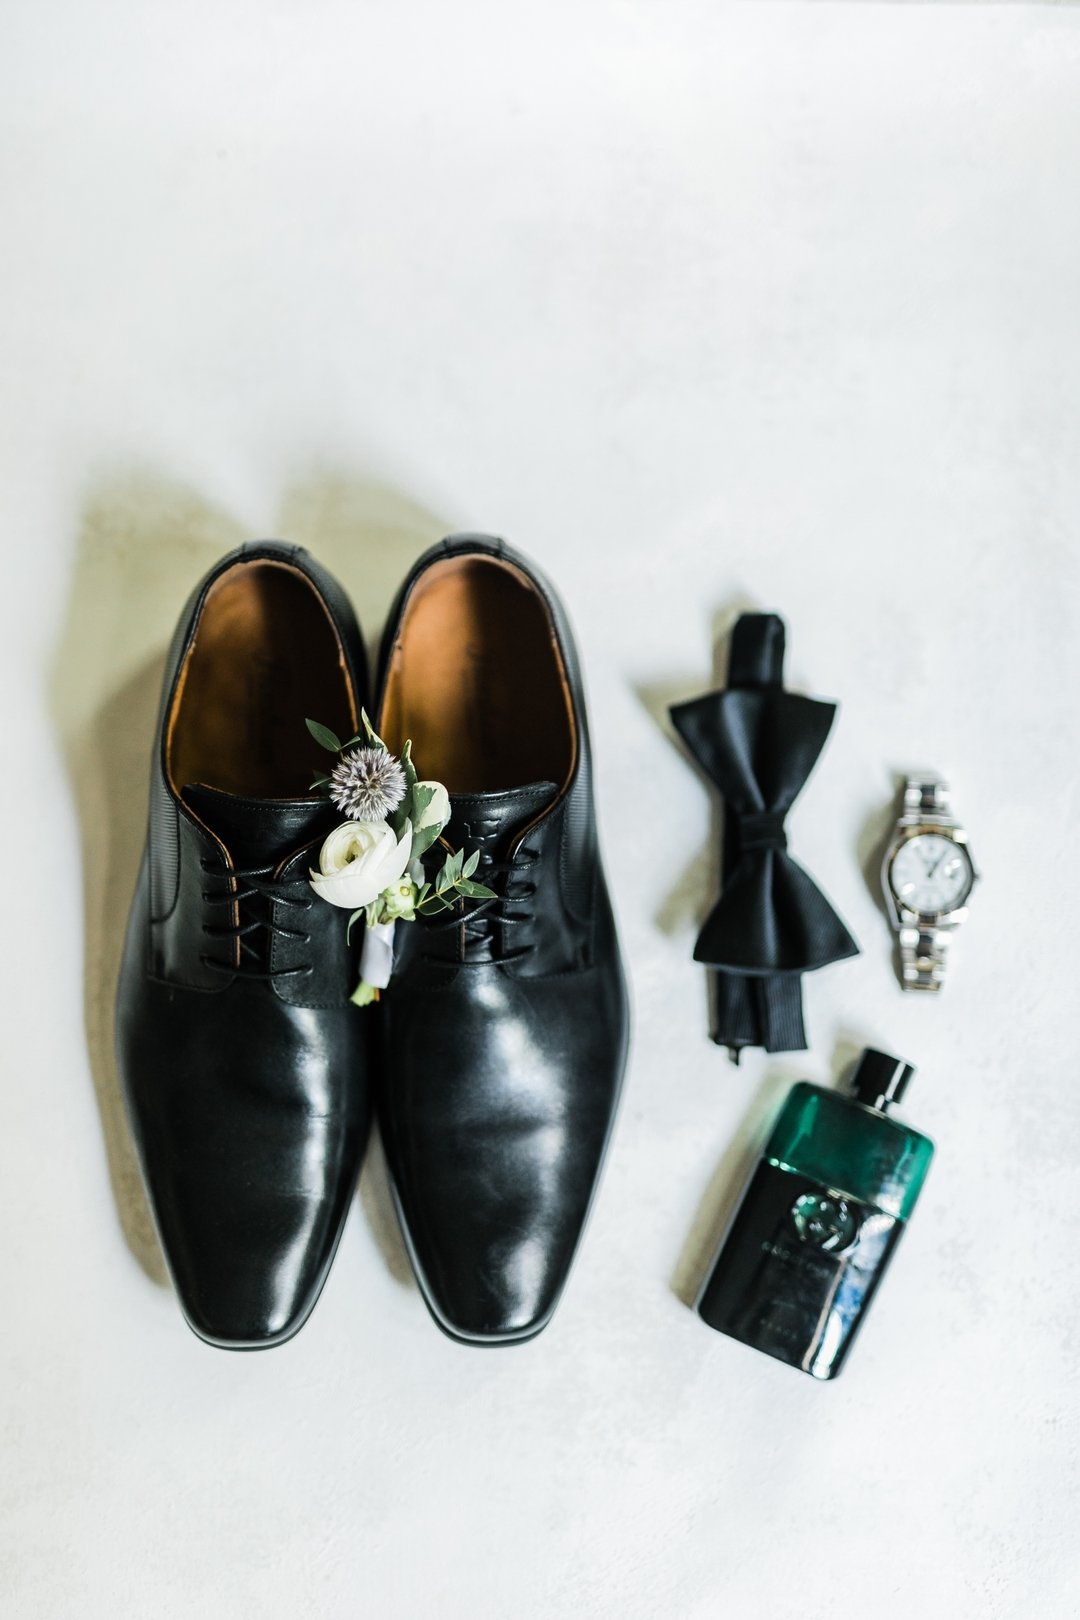 The perfect set up for a dapper groom: stylish shoes, a crisp bowtie, the perfect size boutonni&egrave;re, an elegant watch, and a hint of cologne. Someone is ready to make memories that last a lifetime.

Venue: @themansionatoysterbay
Planner: @jorda